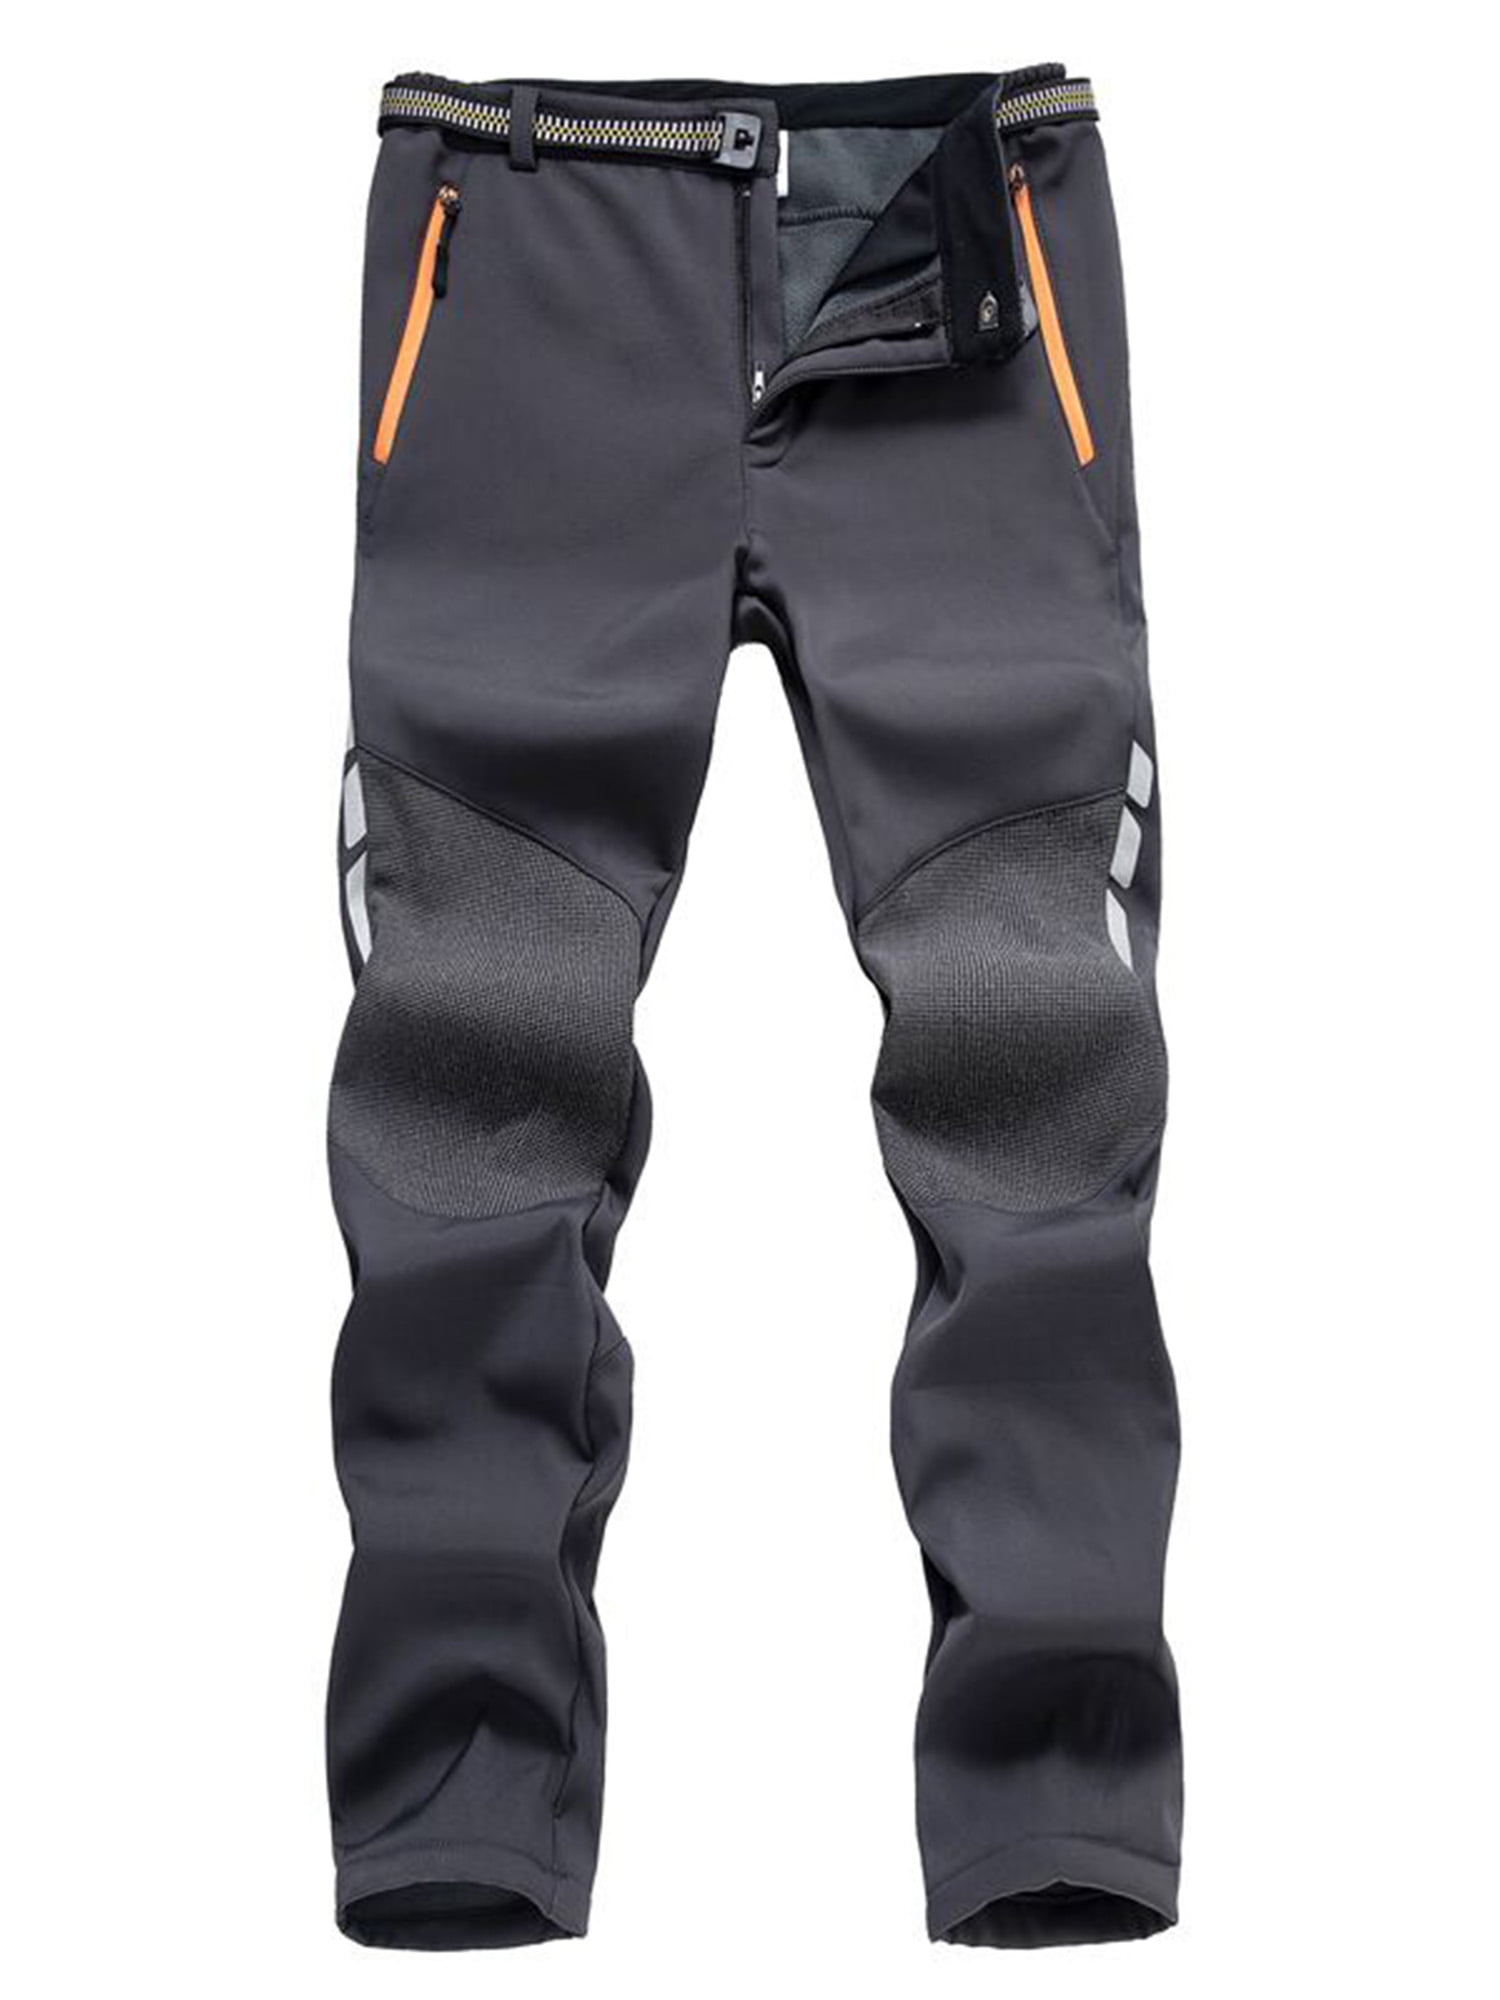 Unisex Casual Pants Windproof Quick-dry Trouser For Outdoor Sports Hiking Skiing 